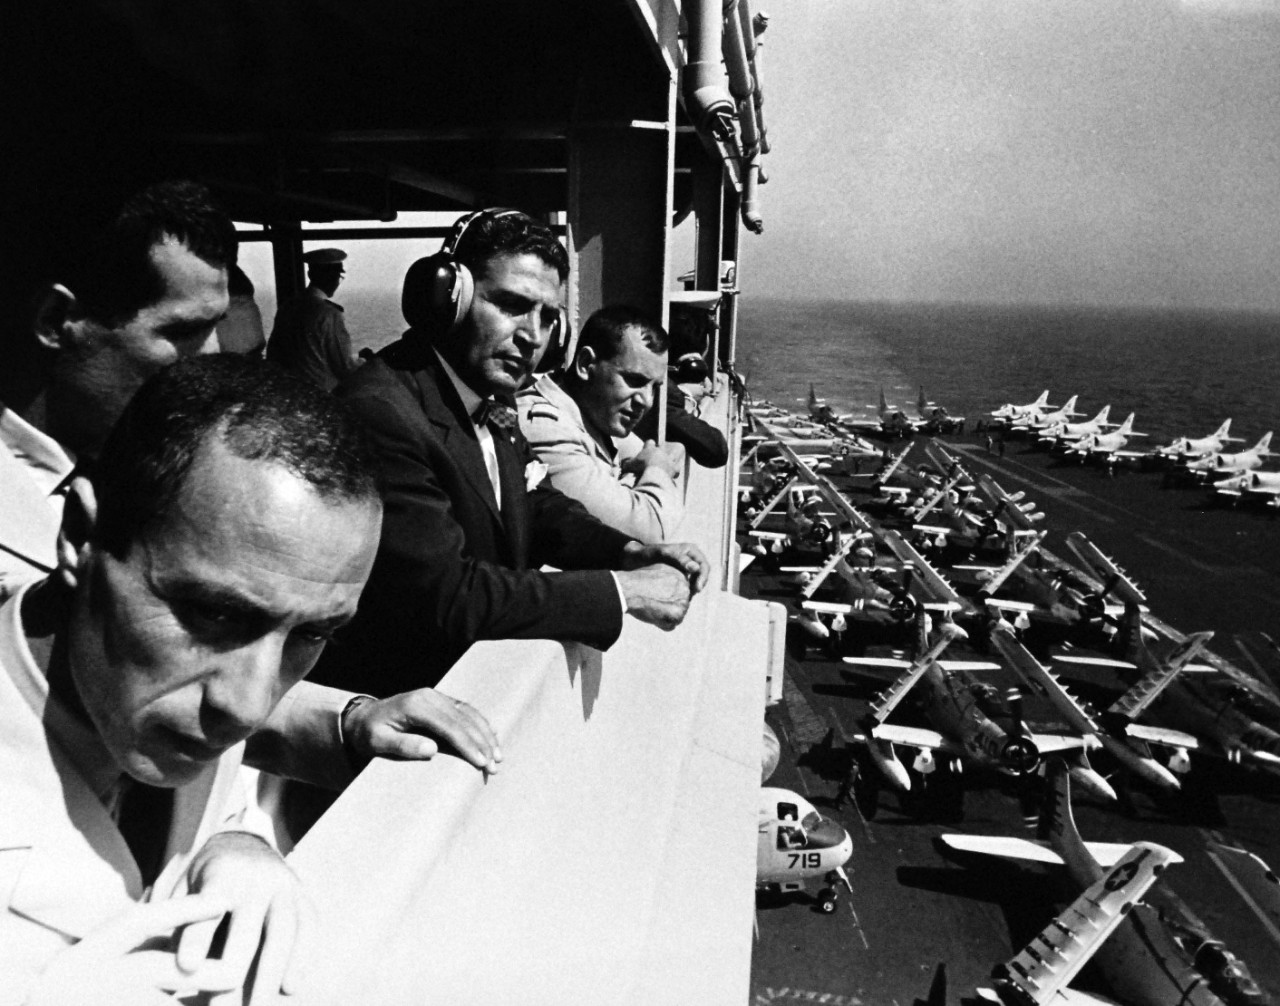 330-PSA-178-64 (USN 1104219E):  Operation Sea Orbit, 1964.   Members of the Moroccan Chamber of Counselors watch flight operations onboard USS Enterprise (CVN 65) during an underway visit off the coast of Africa.  Master caption:  Operation Sea Orbit has completed the first three weeks of its round-the-world cruise proving conclusively the feasibility of operation nuclear surface ships over great distances on a self-sustaining basis.  Sea Orbit is the first world cruise of the surface nuclear ships.  The task force is made-up of USS Enterprise (CVN-65), USS Long Beach (CLGN-9), and USS Bainbridge (DLGN-25).   The world cruise has a dual mission.  It offers practical experience in operation of nuclear-powered warships independent of support ships, a fast impractical for conventionally powers ships.  Equally important, and immediately evident is the opportunity to win friends in areas not frequently visited by U.S. Navy ships, and to show the world an all nuclear element of the world’s greats power for peace.  Two other world circumnavigations were made by U.S. nuclear vessels, both submarines.  Photograph released August 22, 1964.  Official U.S. Navy Photograph, now in the collections of the National Archives.   (2015/11/03).